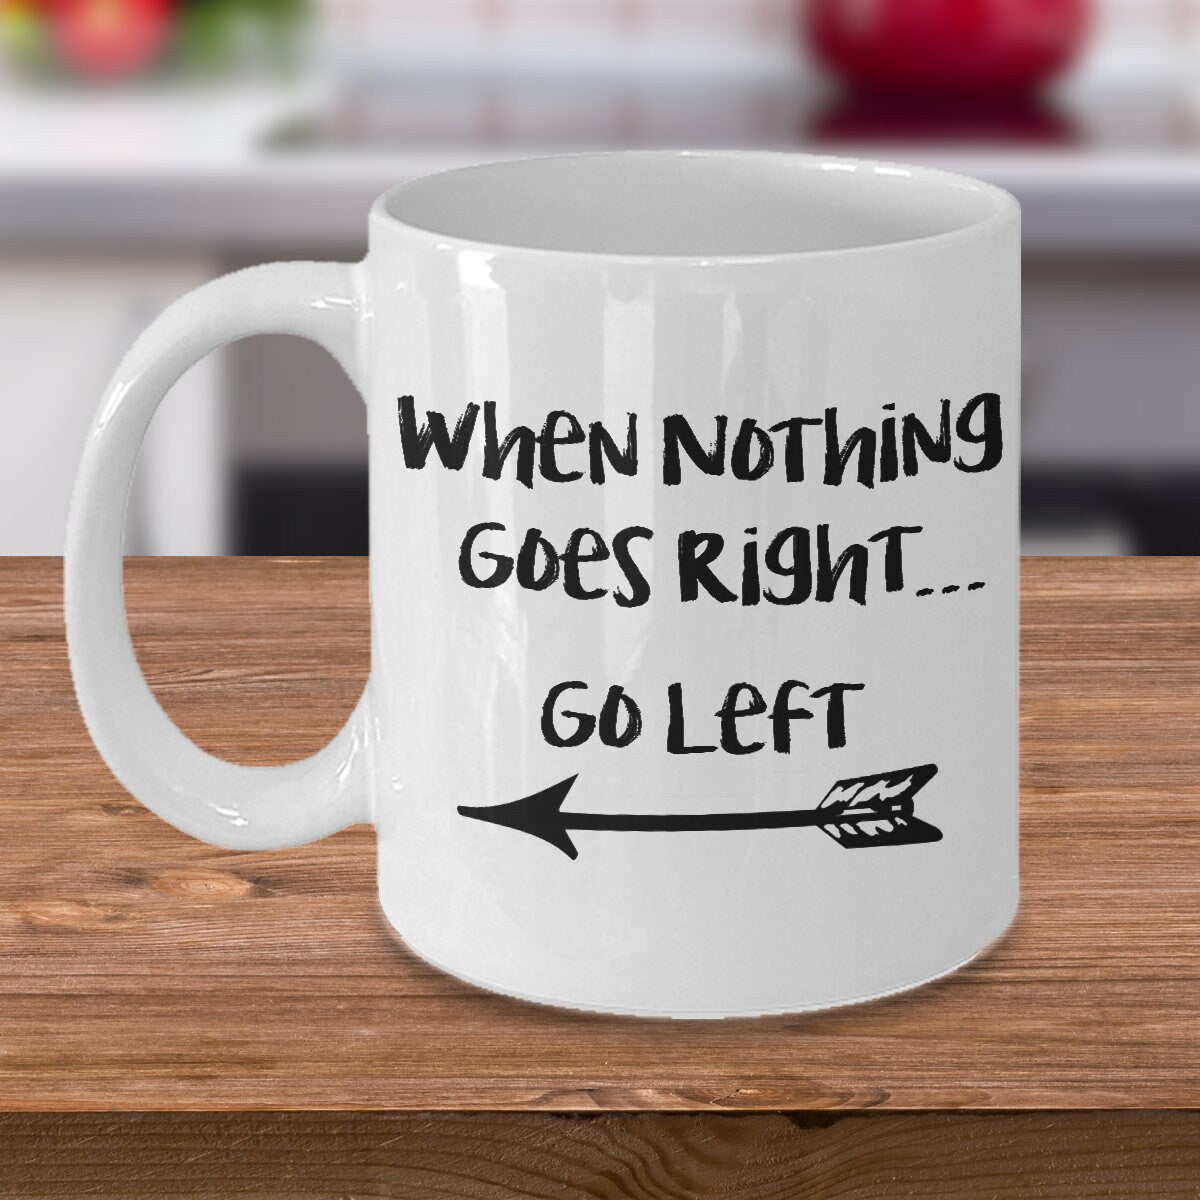 Inspirational Mug When Nothing Goes Right Go Left Mug Unique Gift cute mugs Cheap Gift Good Vibes Positive saying Happy Gift for Birthday